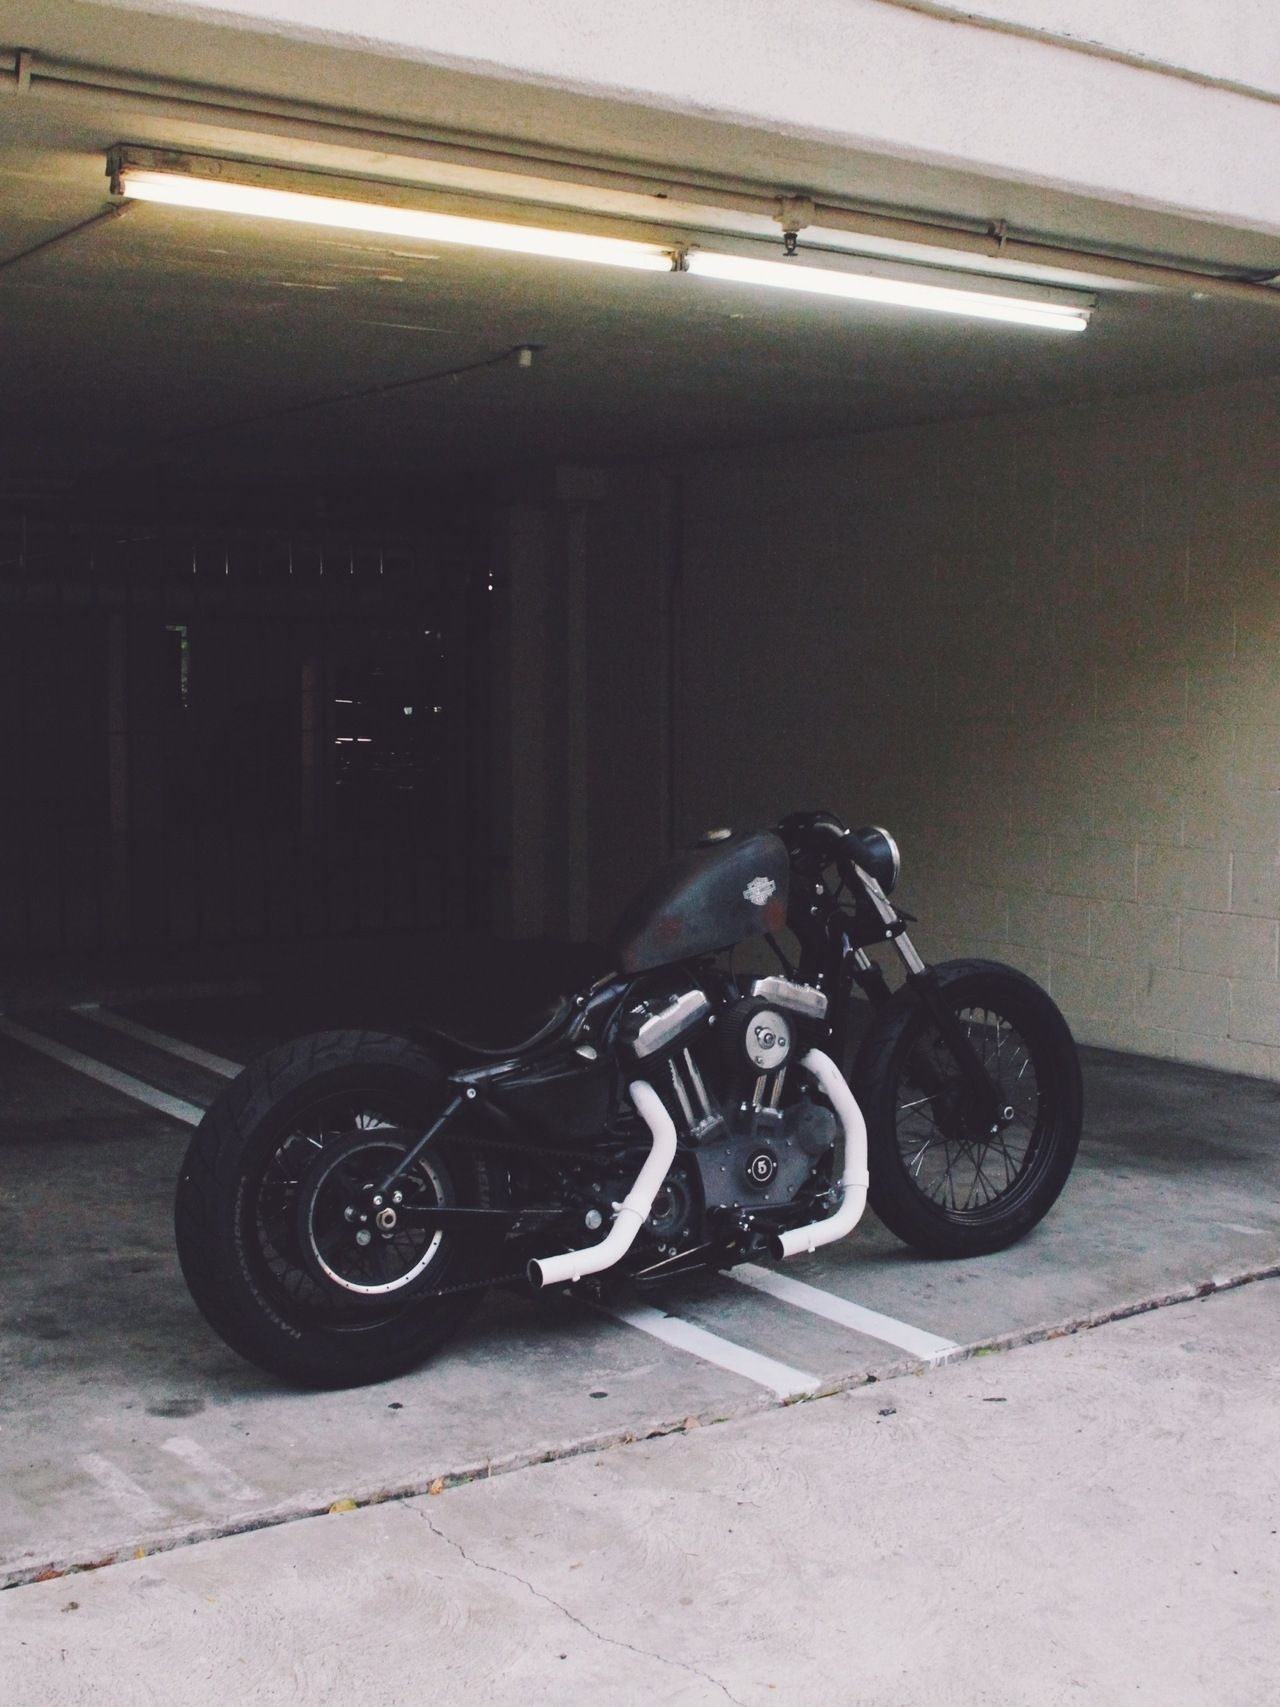 Bobber Motorcycle Images Wallpapers